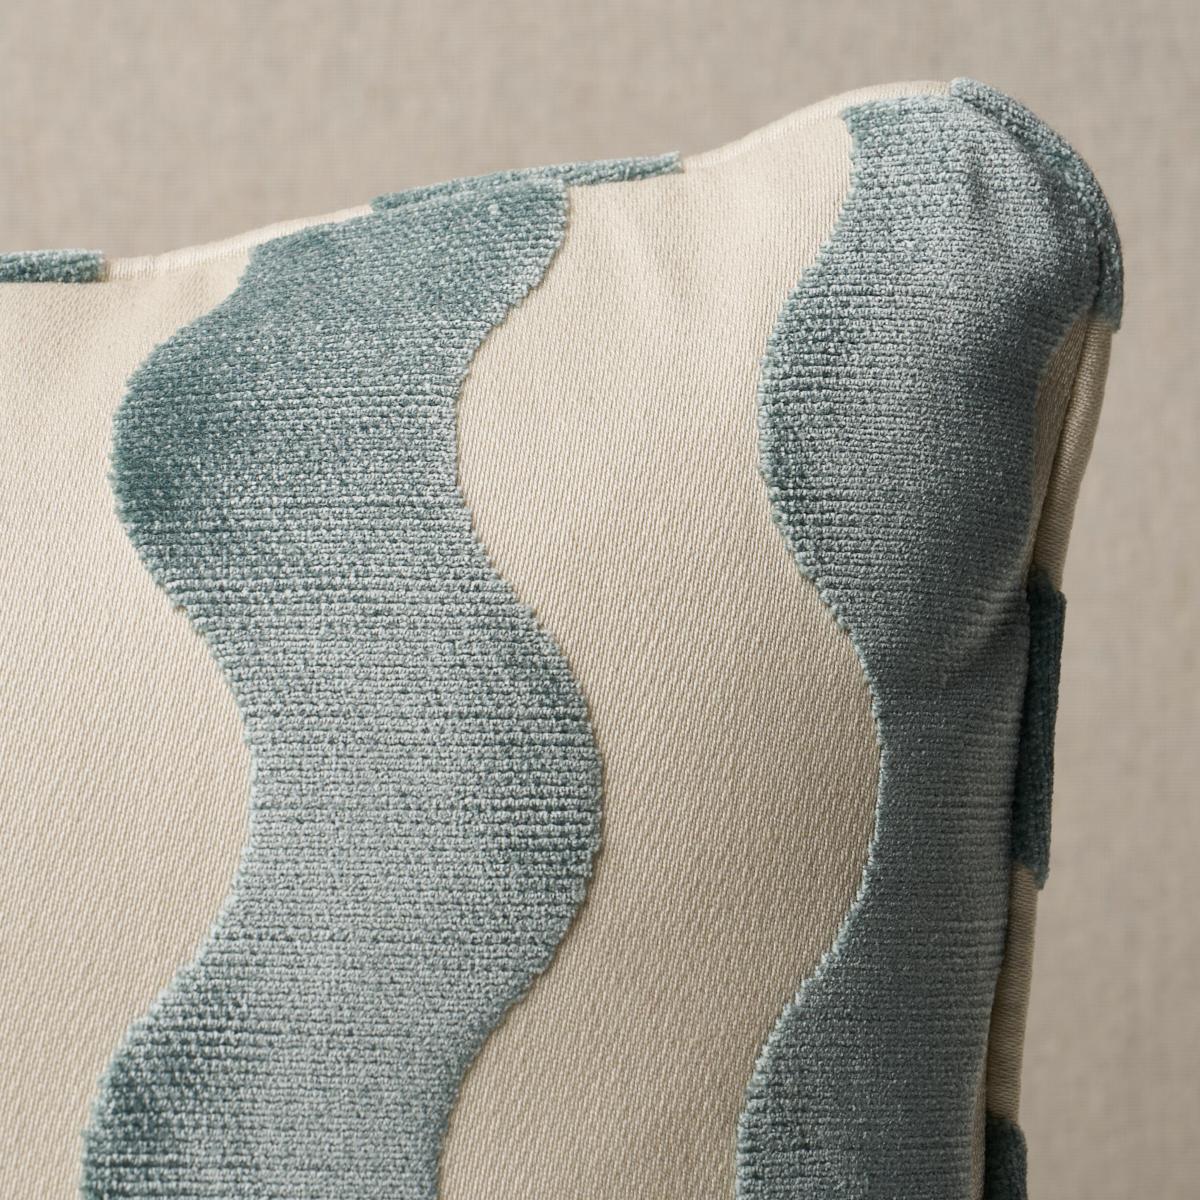 This pillow features The Wave by Miles Redd with a self-welt finish. A chic, graphic cut velvet inspired by 1970s Pierre Cardin and Yves Saint Laurent designs. Pillow includes a feather/down fill insert and hidden zipper closure.